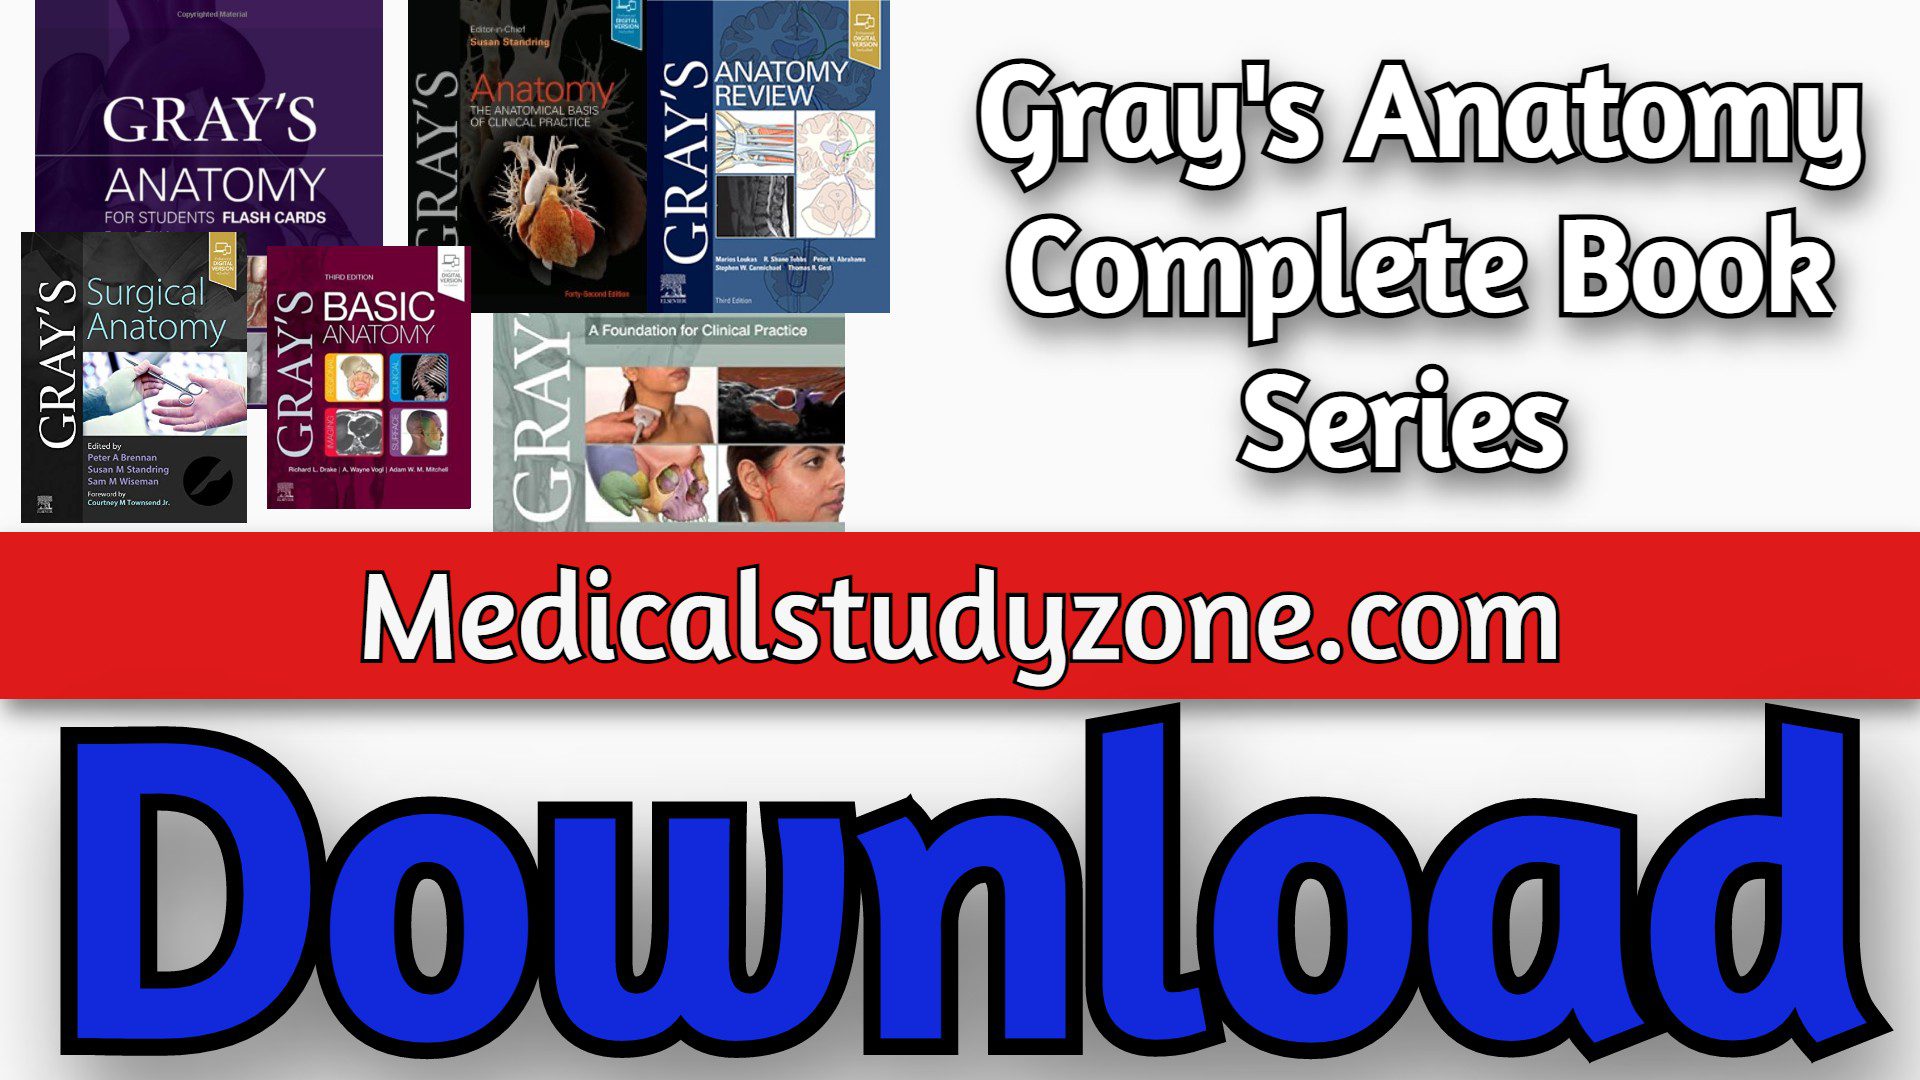 Gray's Anatomy Complete Book Series Latest 2023 PDF Free Download